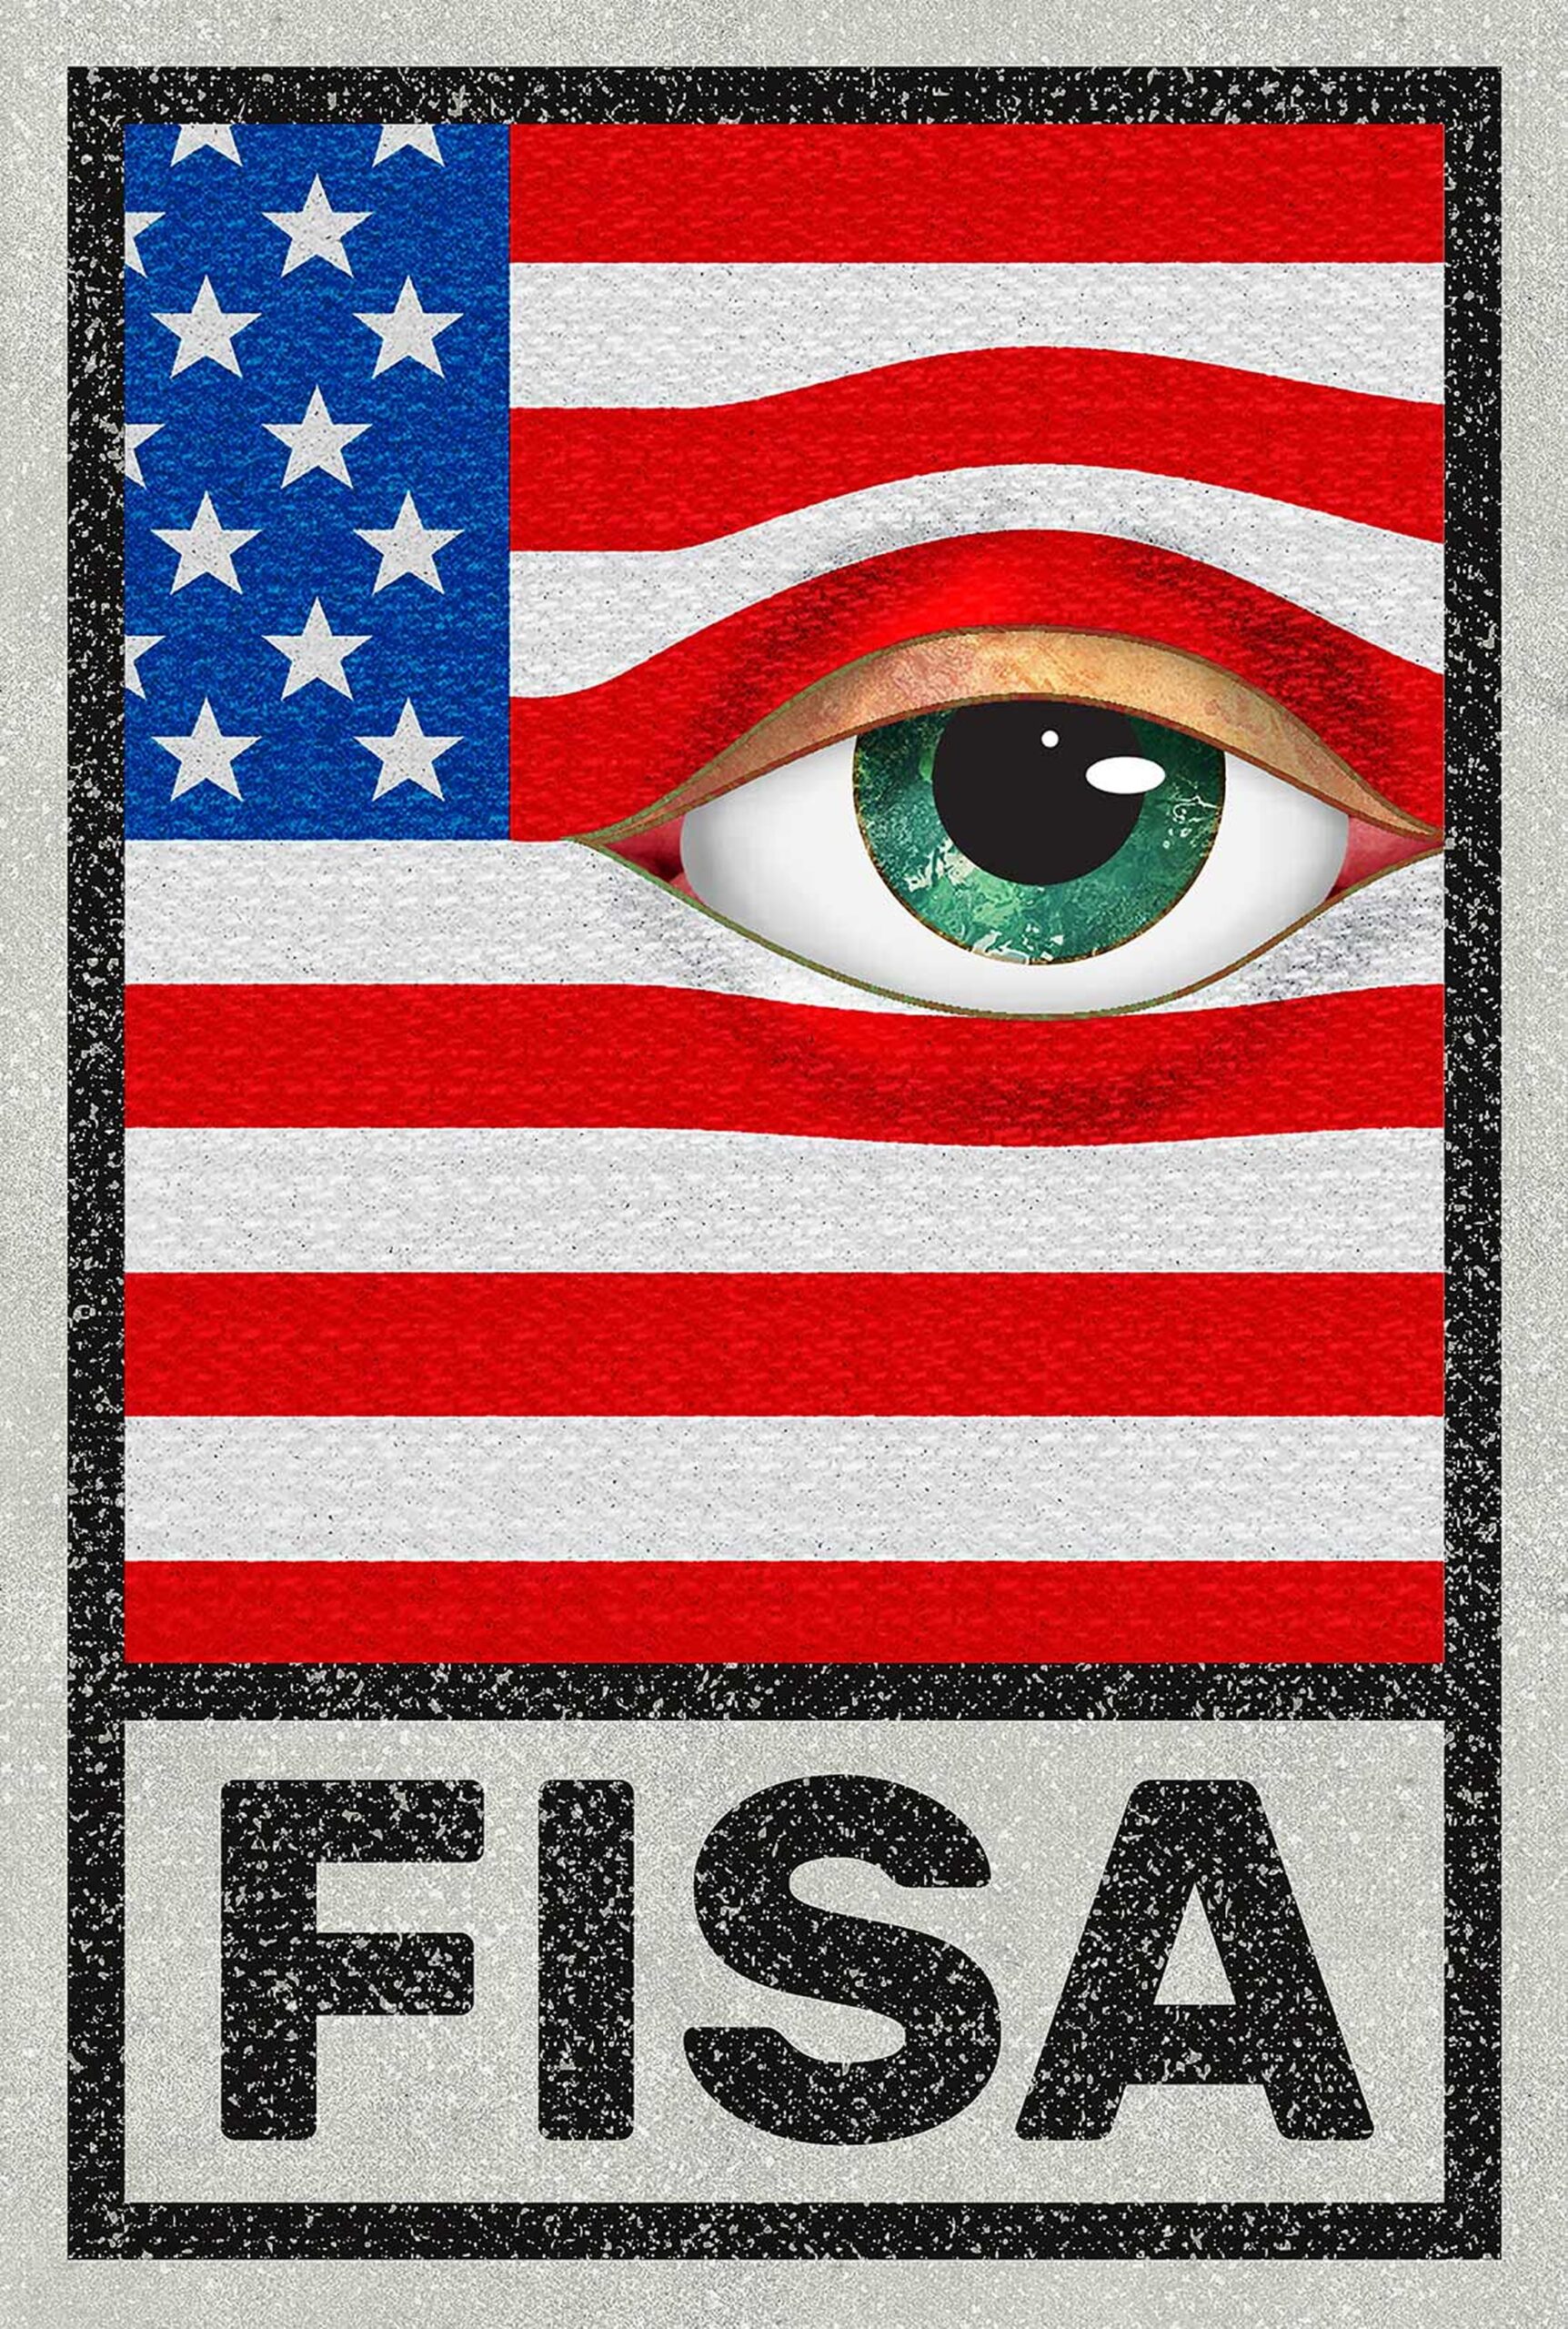 Trump’s Truths: Unmasking the FISA Fiasco and Spying Spectacle